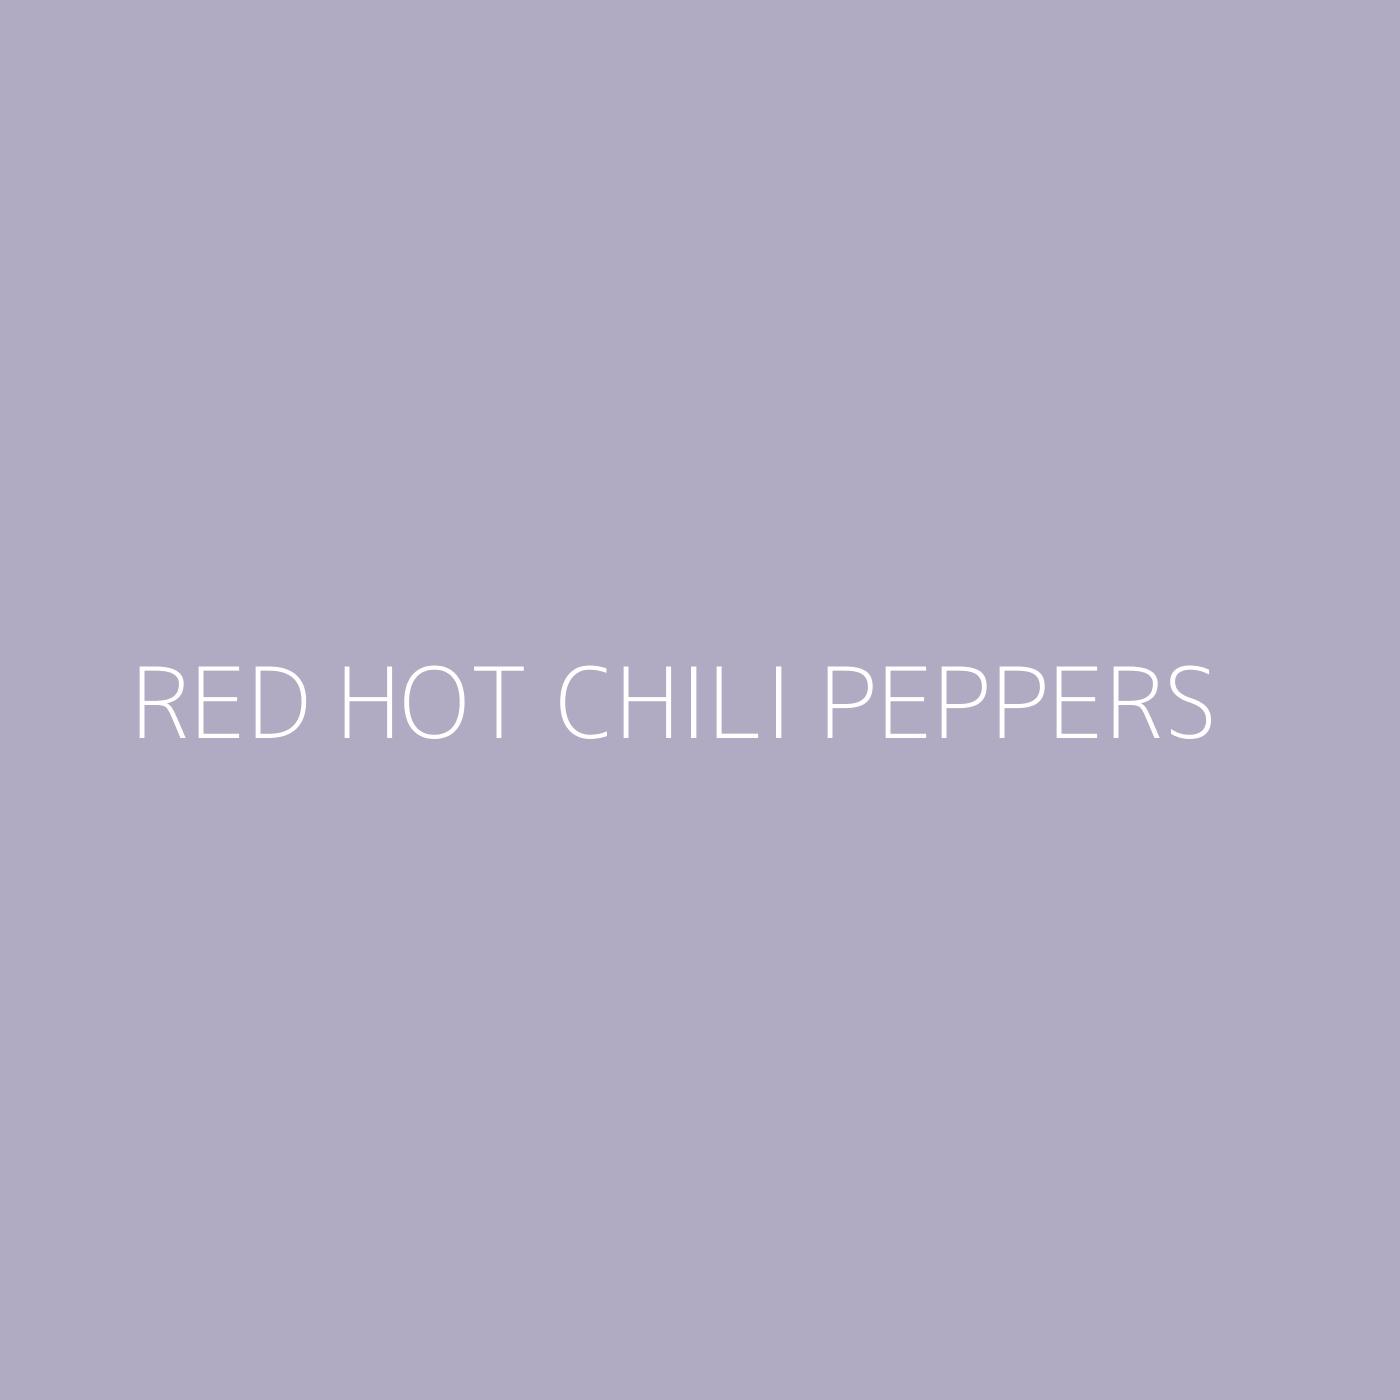 Red Hot Chili Peppers Playlist Artwork